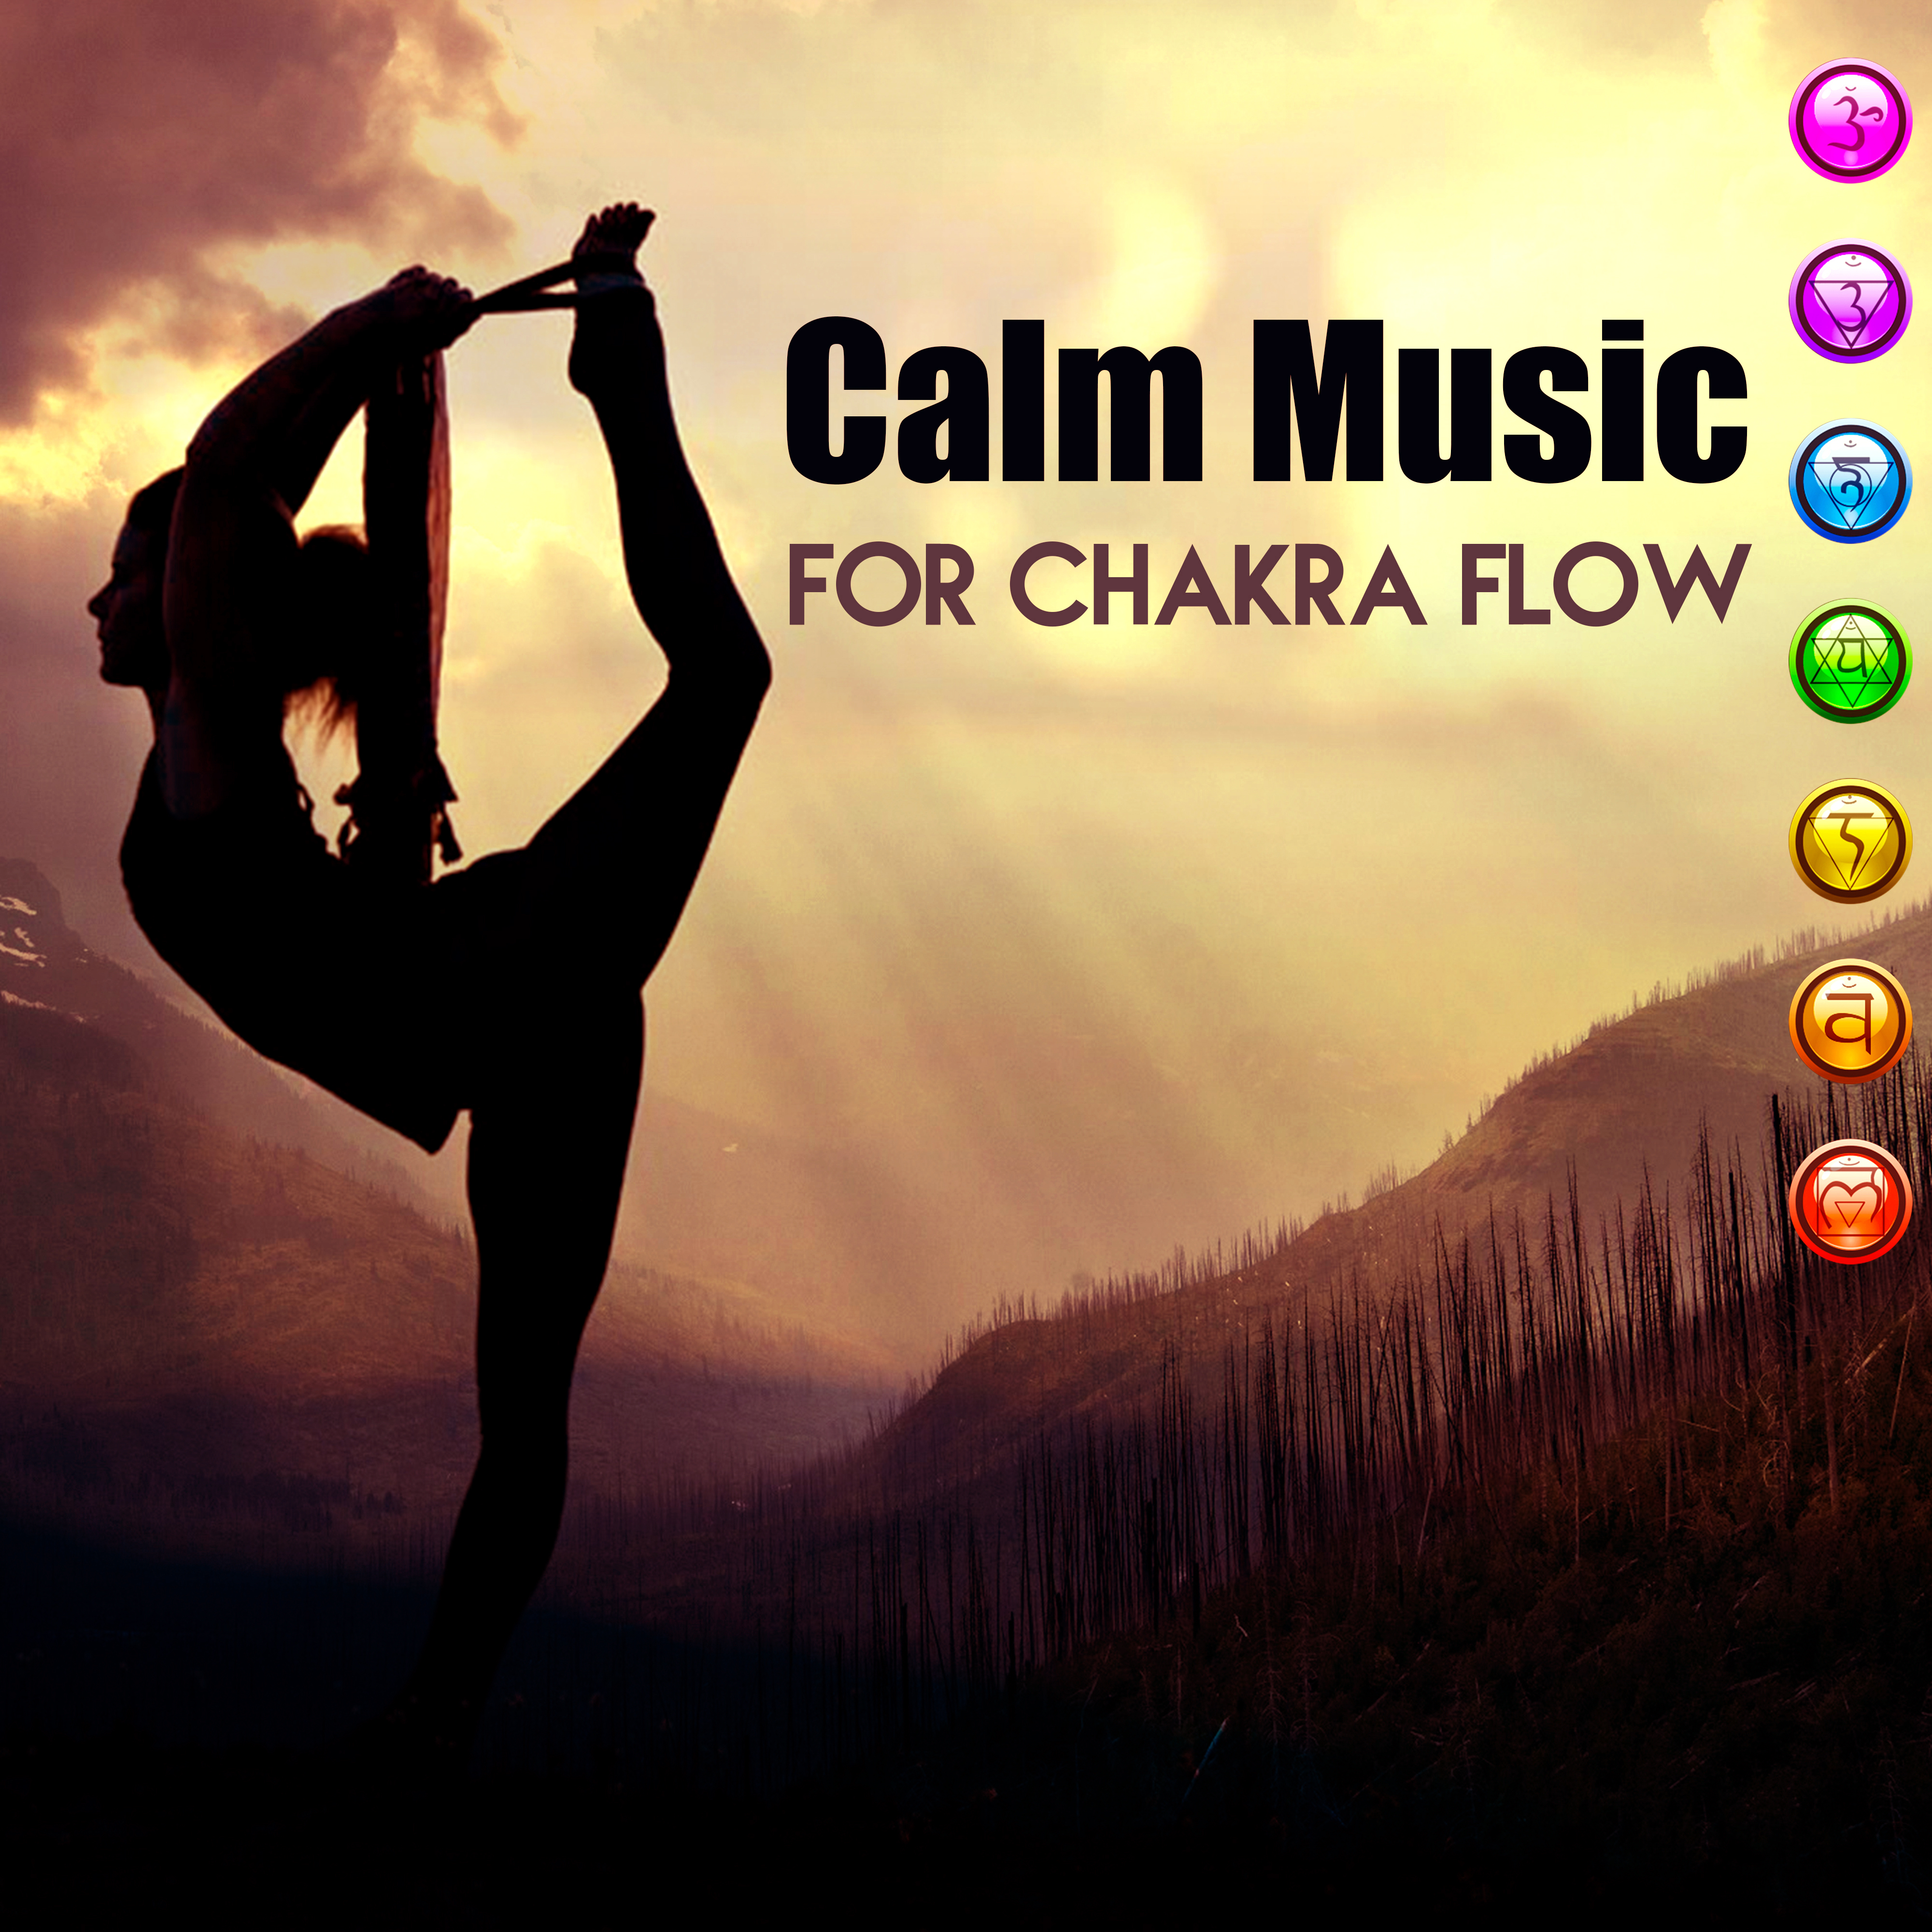 Calm Music for Chakra Flow – Soft Songs for Relaxation, Easy Listening, Peaceful Music, Rest a Bit